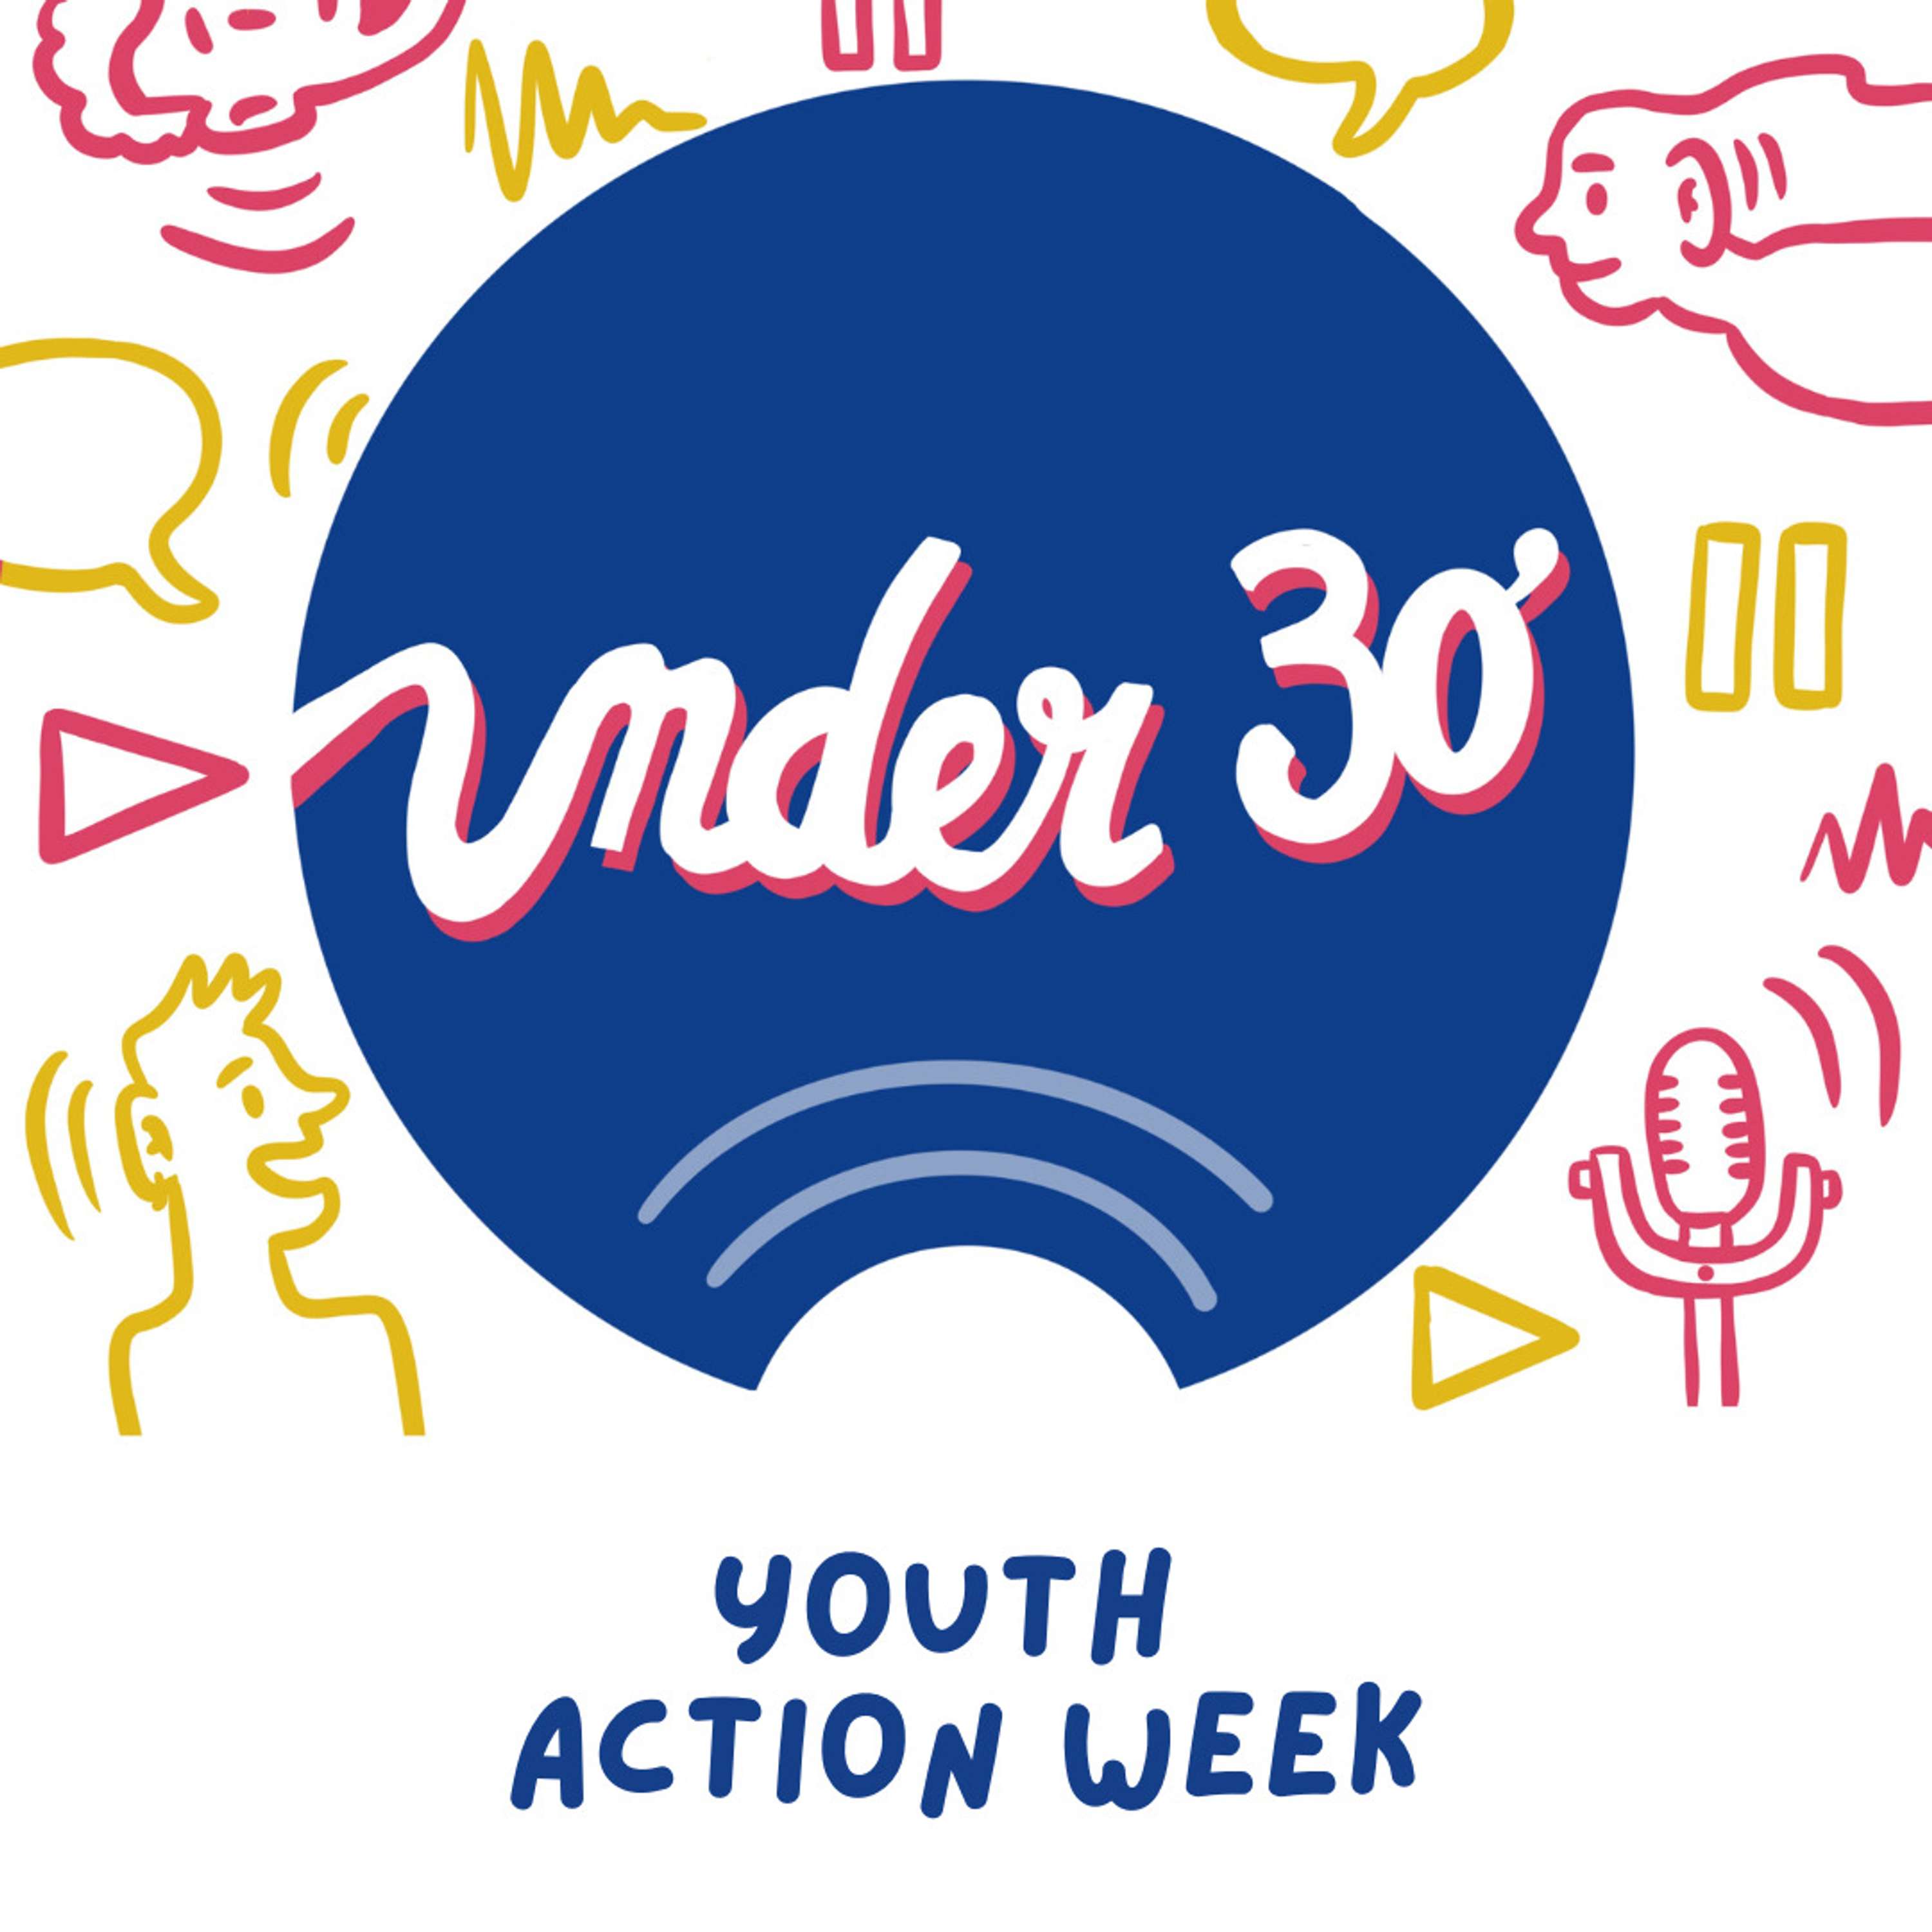 Youth Action Week